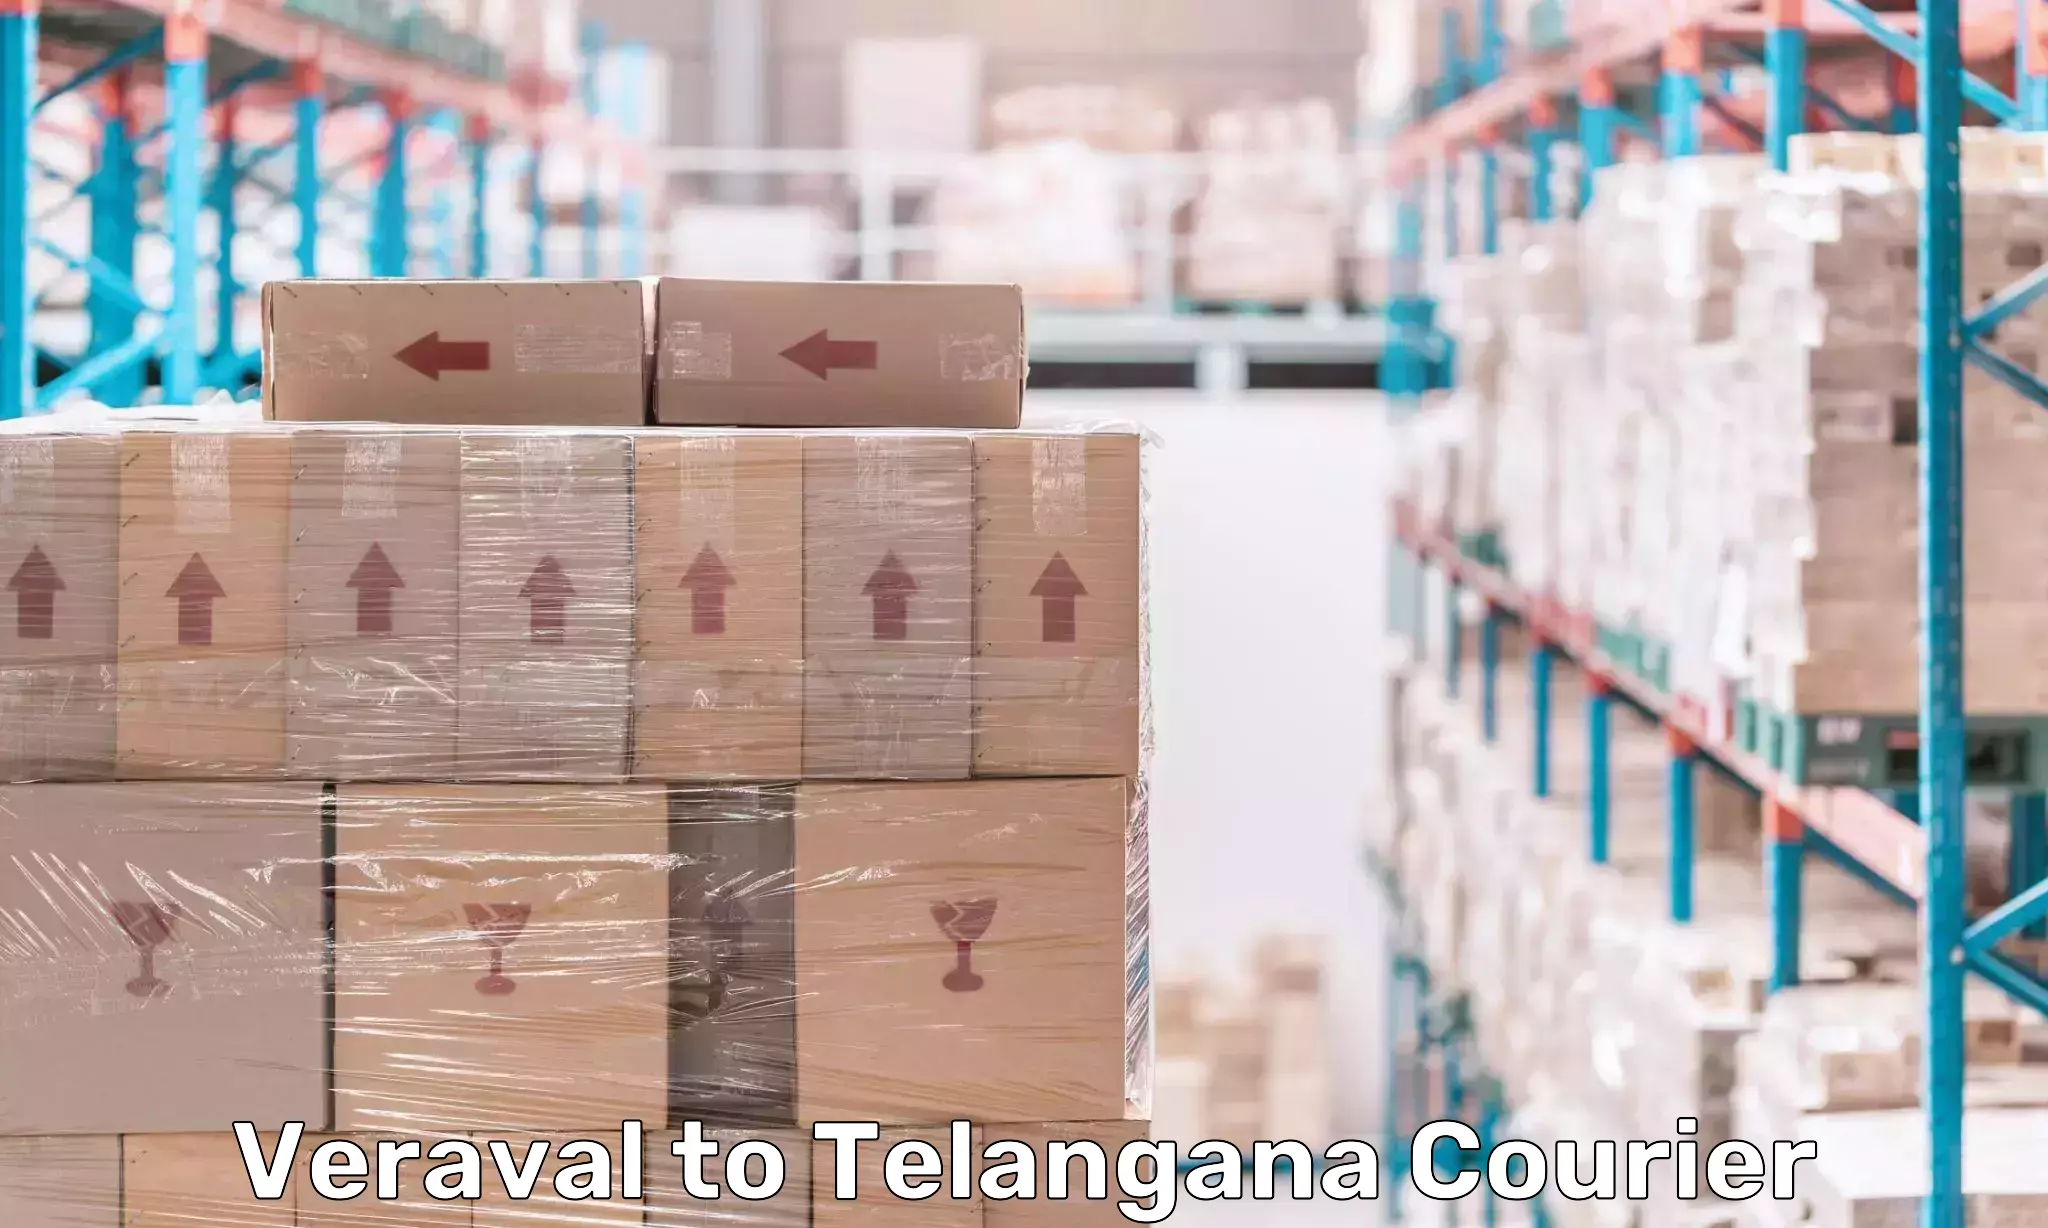 Efficient shipping operations Veraval to Yerrupalem